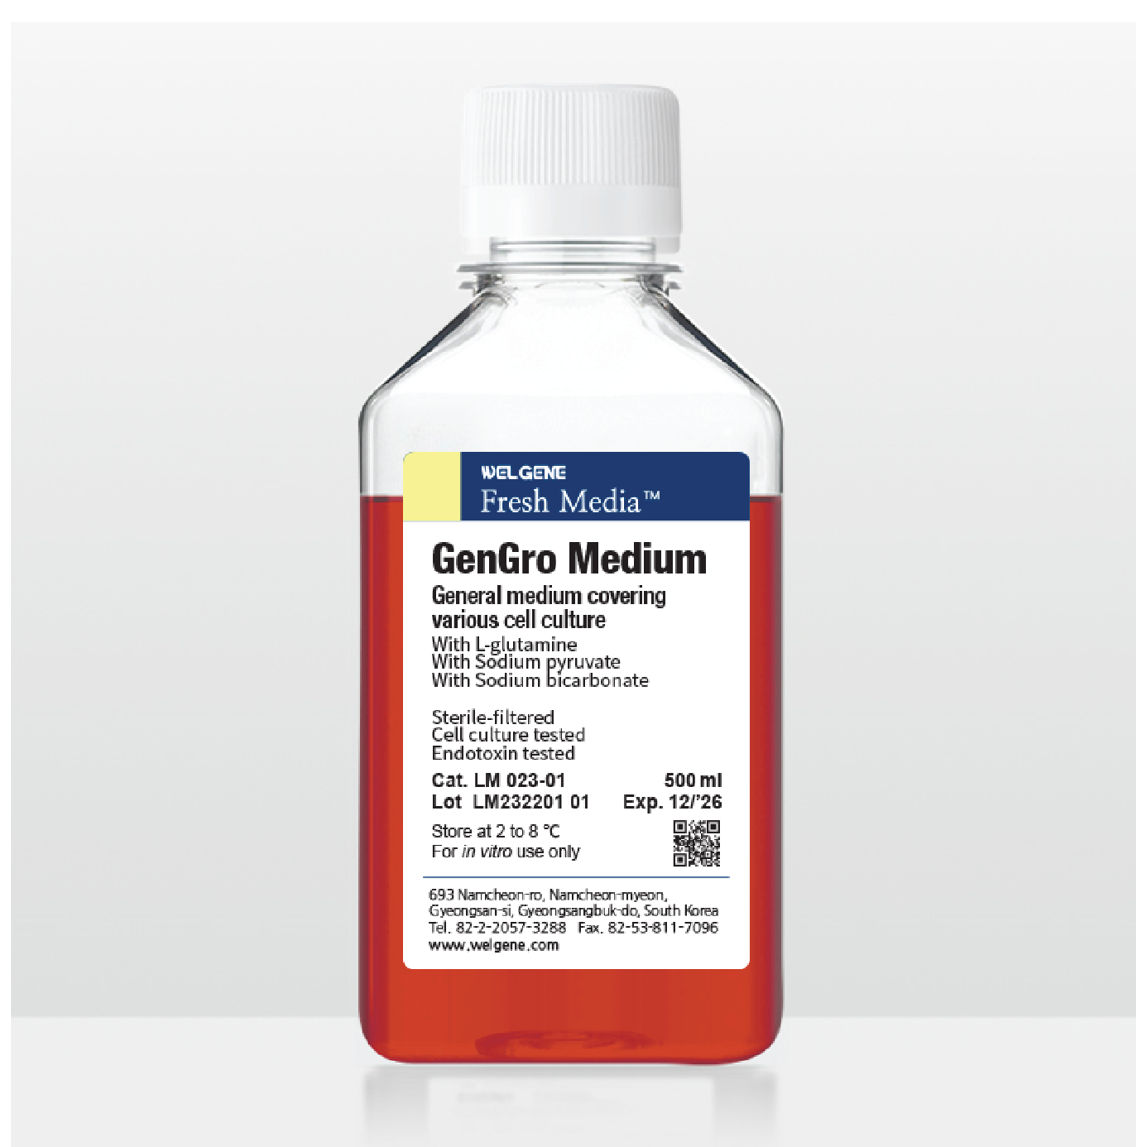 GenGro medium (LM023-01) Covering Various Cell culture